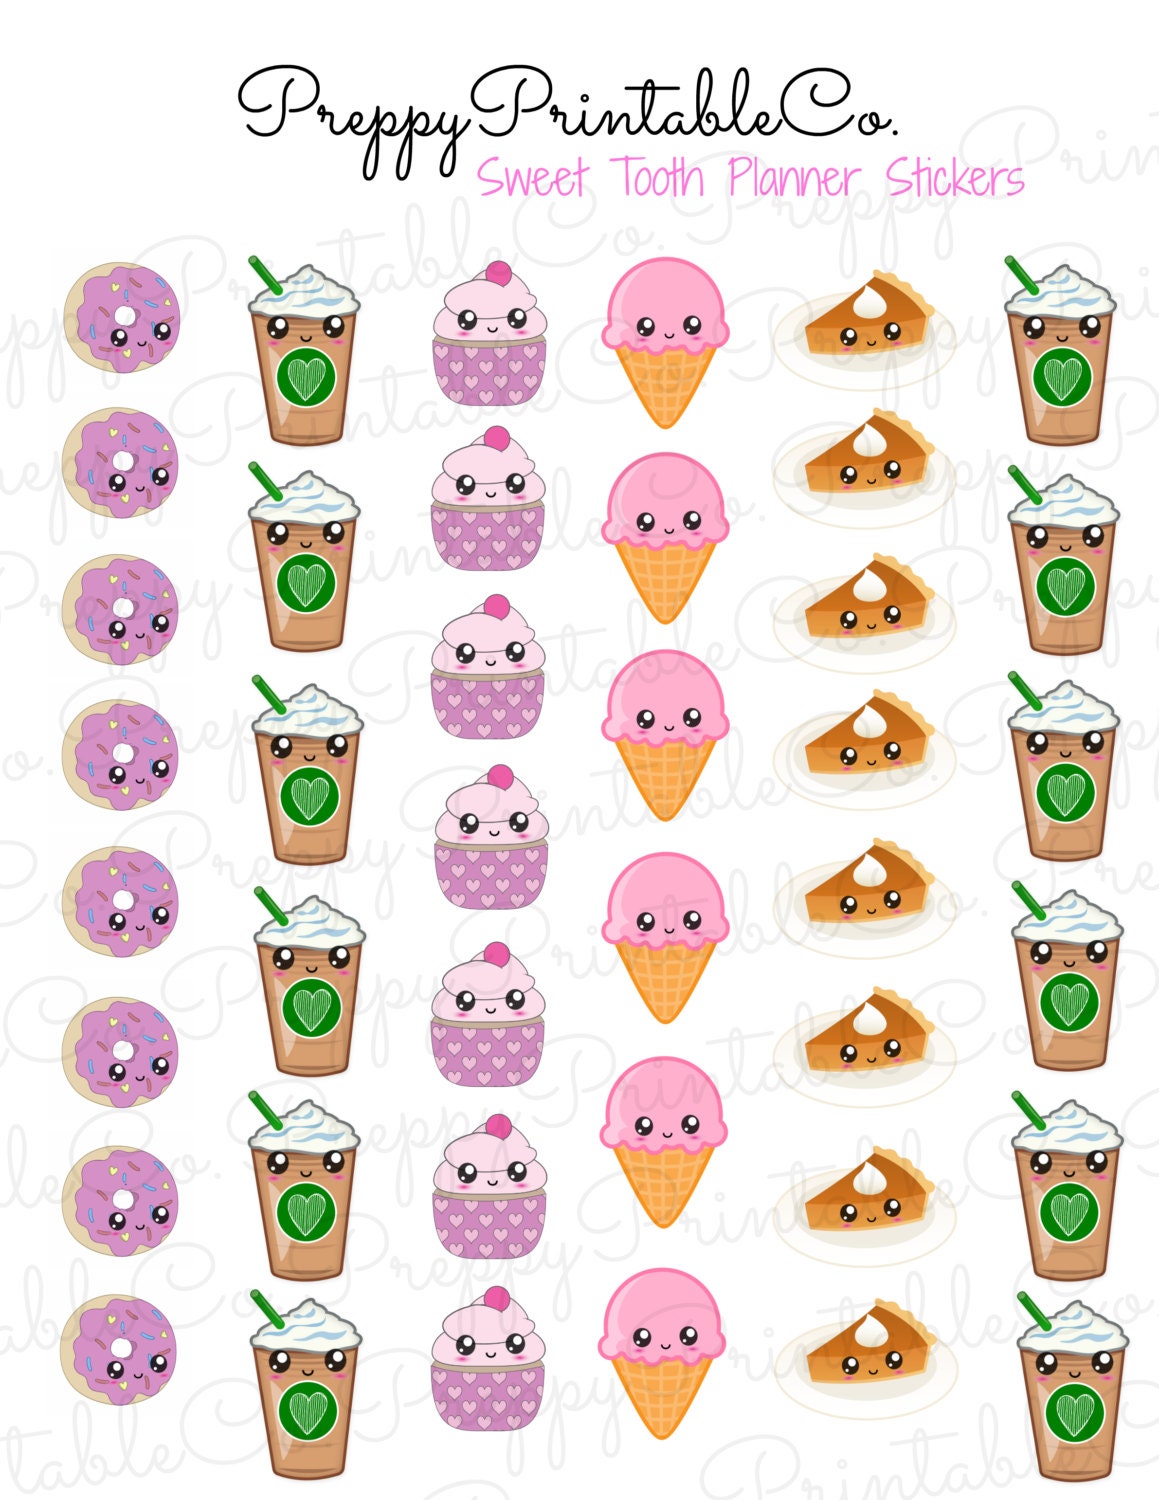 sweet tooth planner stickers printable pdf perfect for